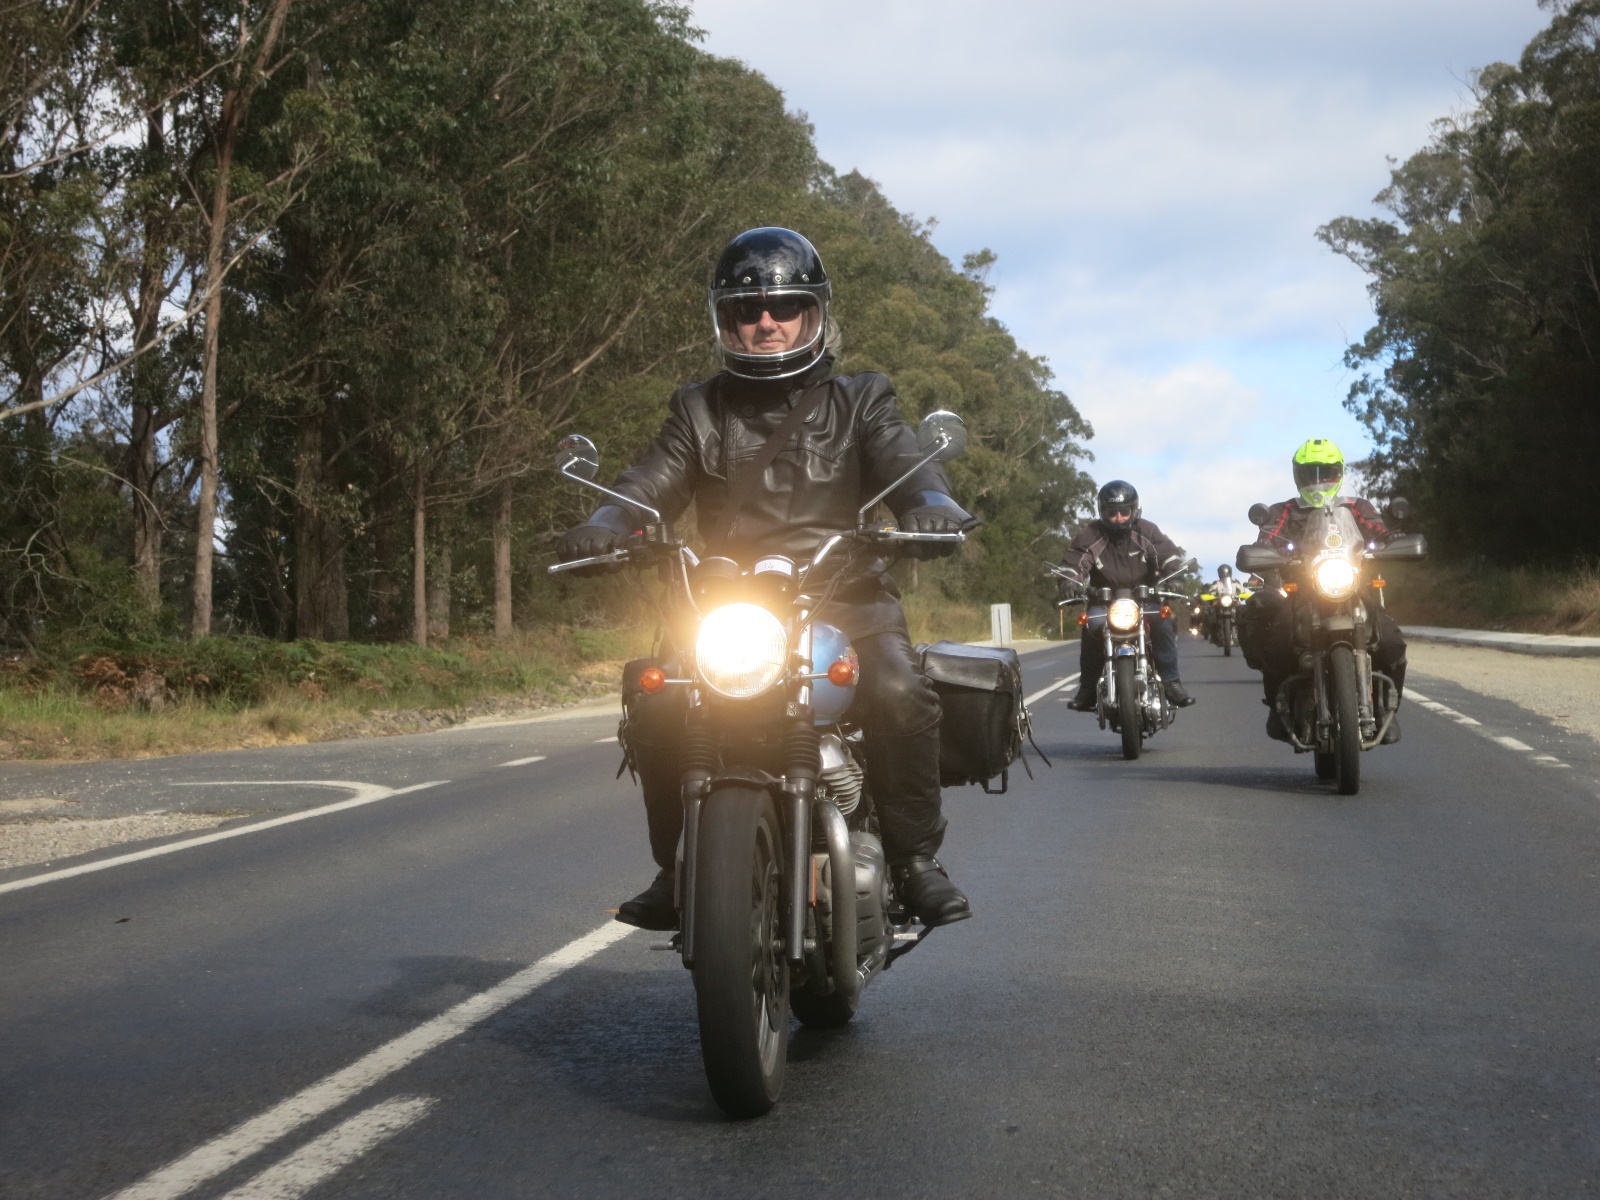 A group of people riding motorcycles down a road Description automatically generated with low confidence